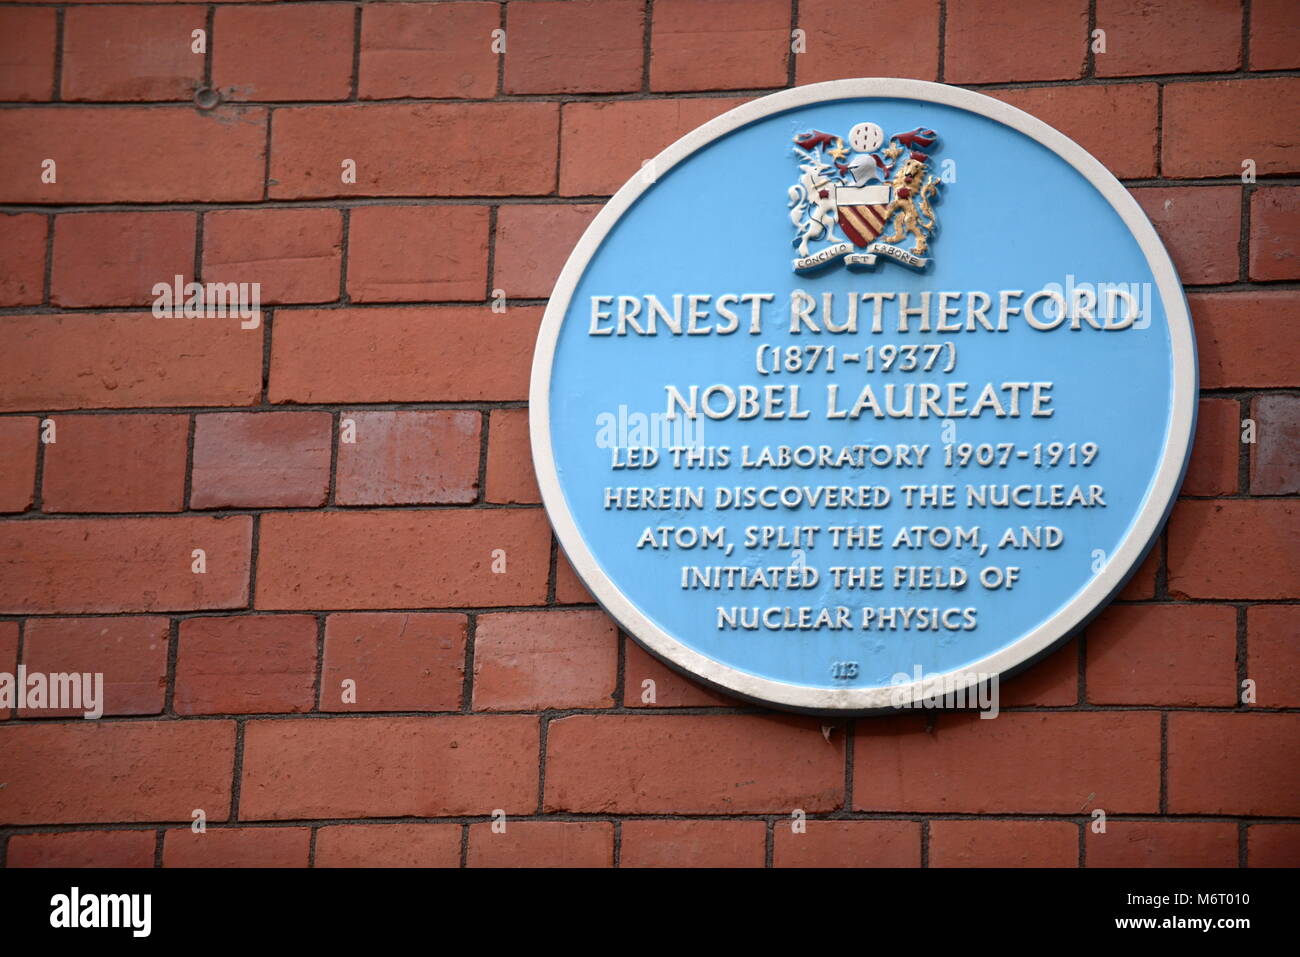 Ernest Rutherford memorial plaque Stock Photo